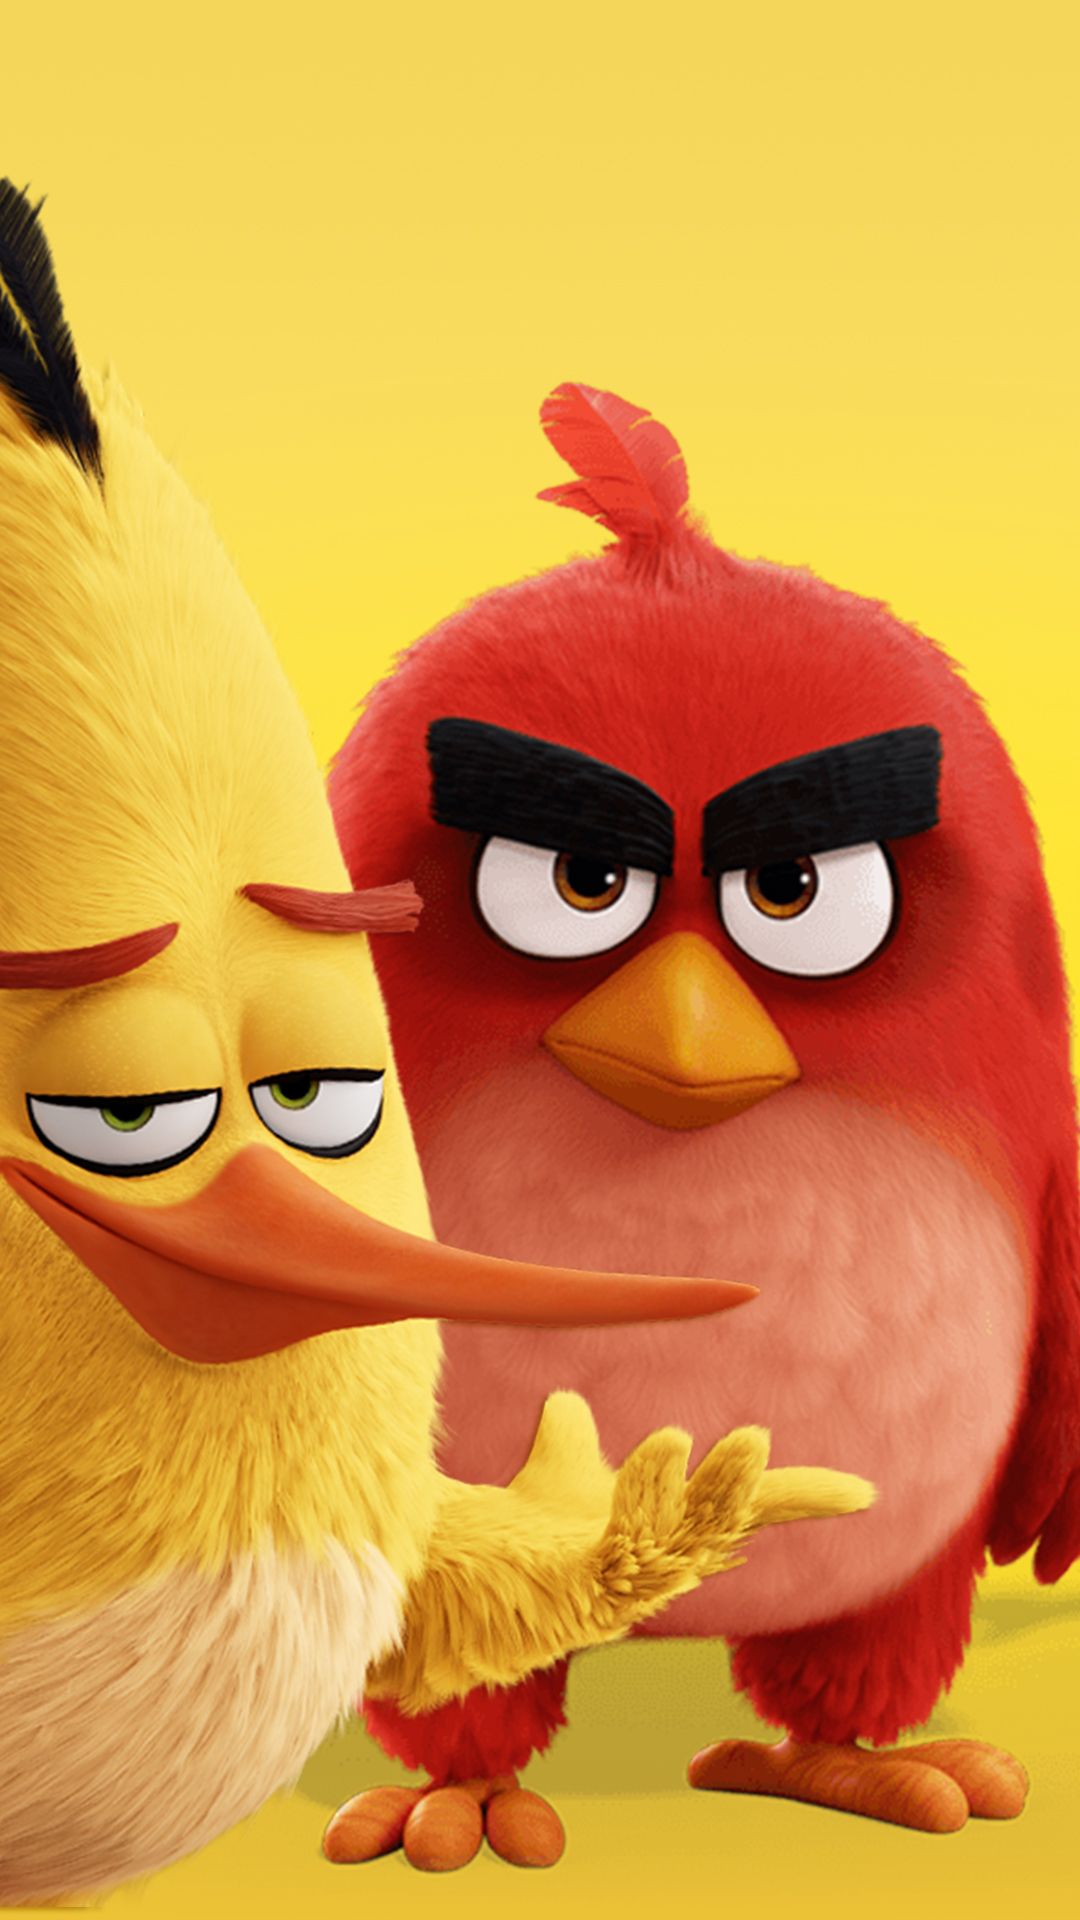 Angry Birds Wallpaper For Cellphone